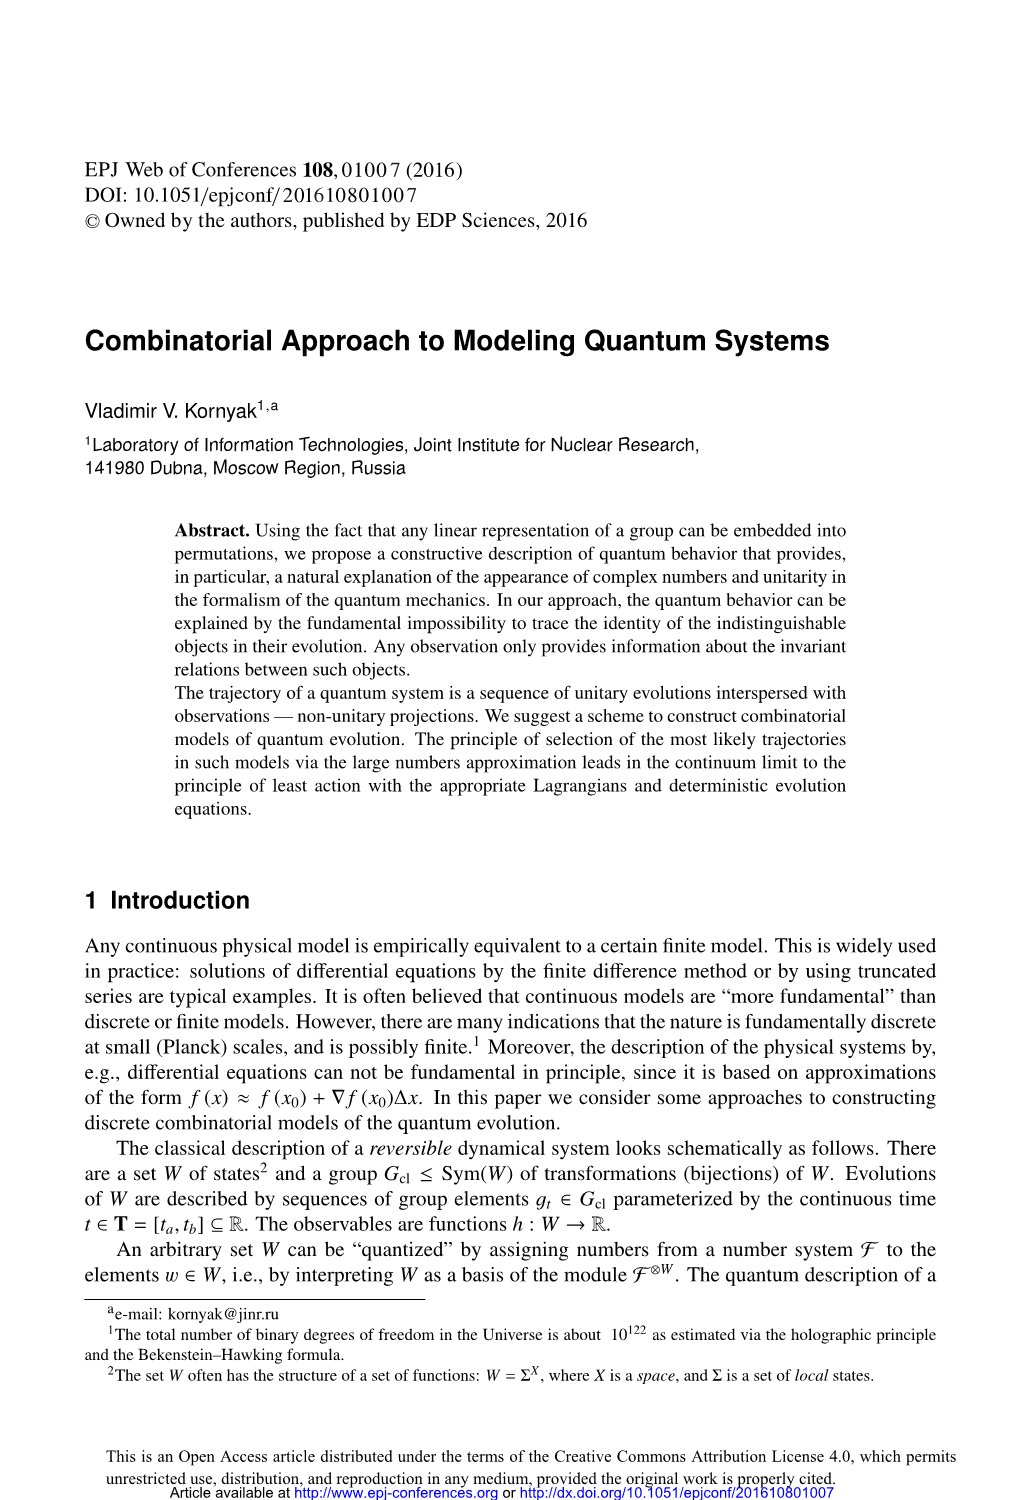 Combinatorial Approach to Modeling Quantum Systems